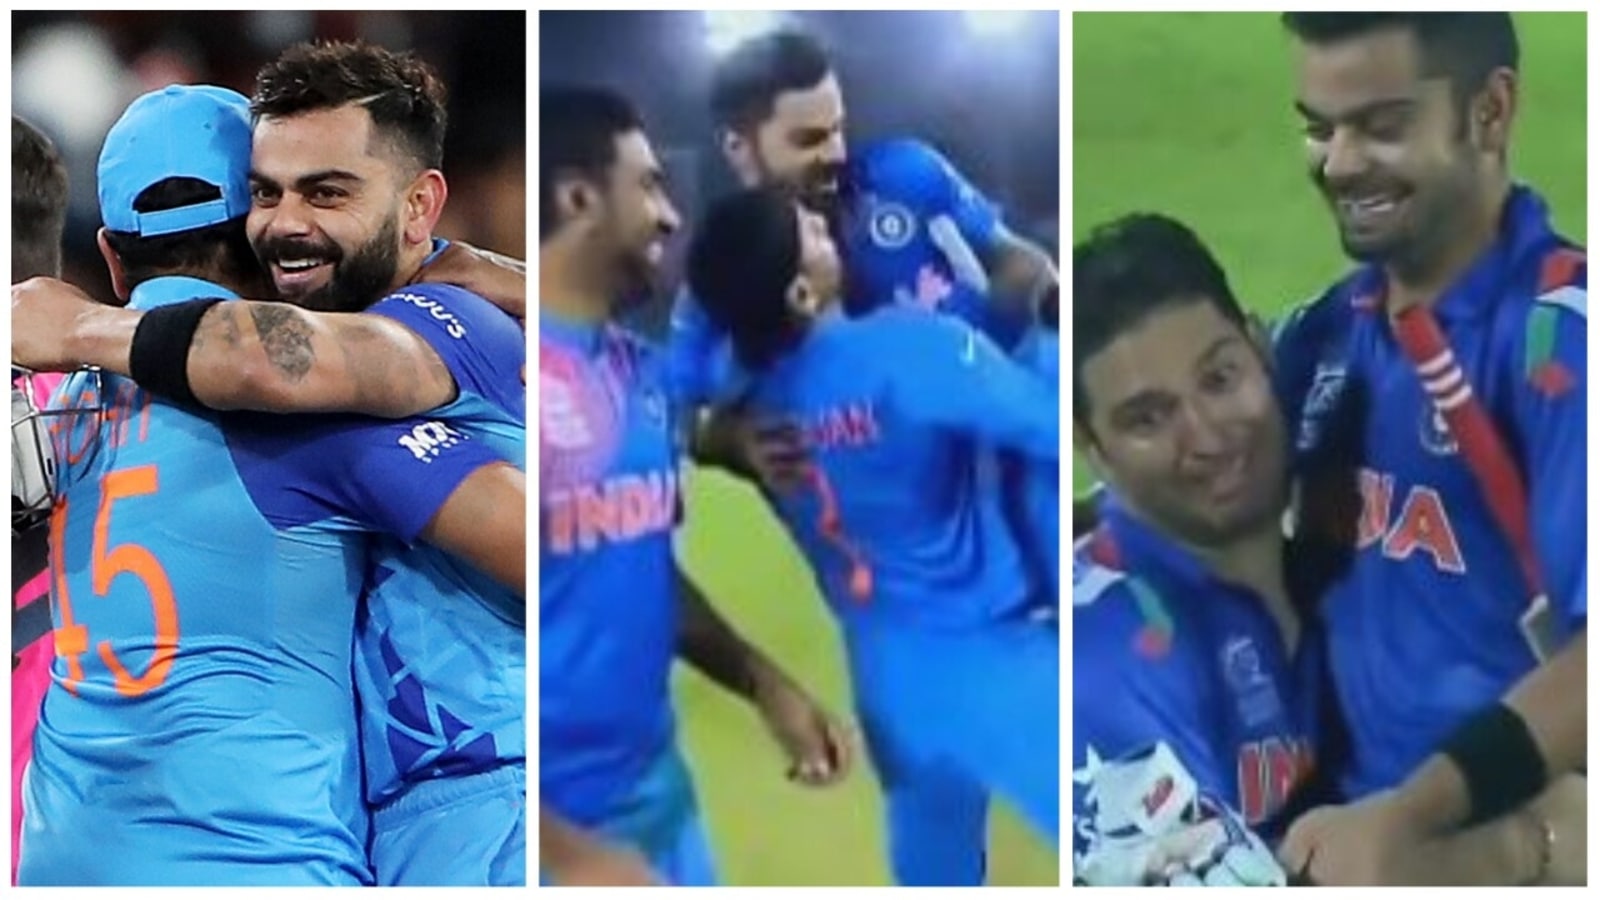 watch-kohli-s-old-video-of-getting-lifted-by-yuvraj-harbhajan-goes-viral-after-ind-vs-pak-wc-clash